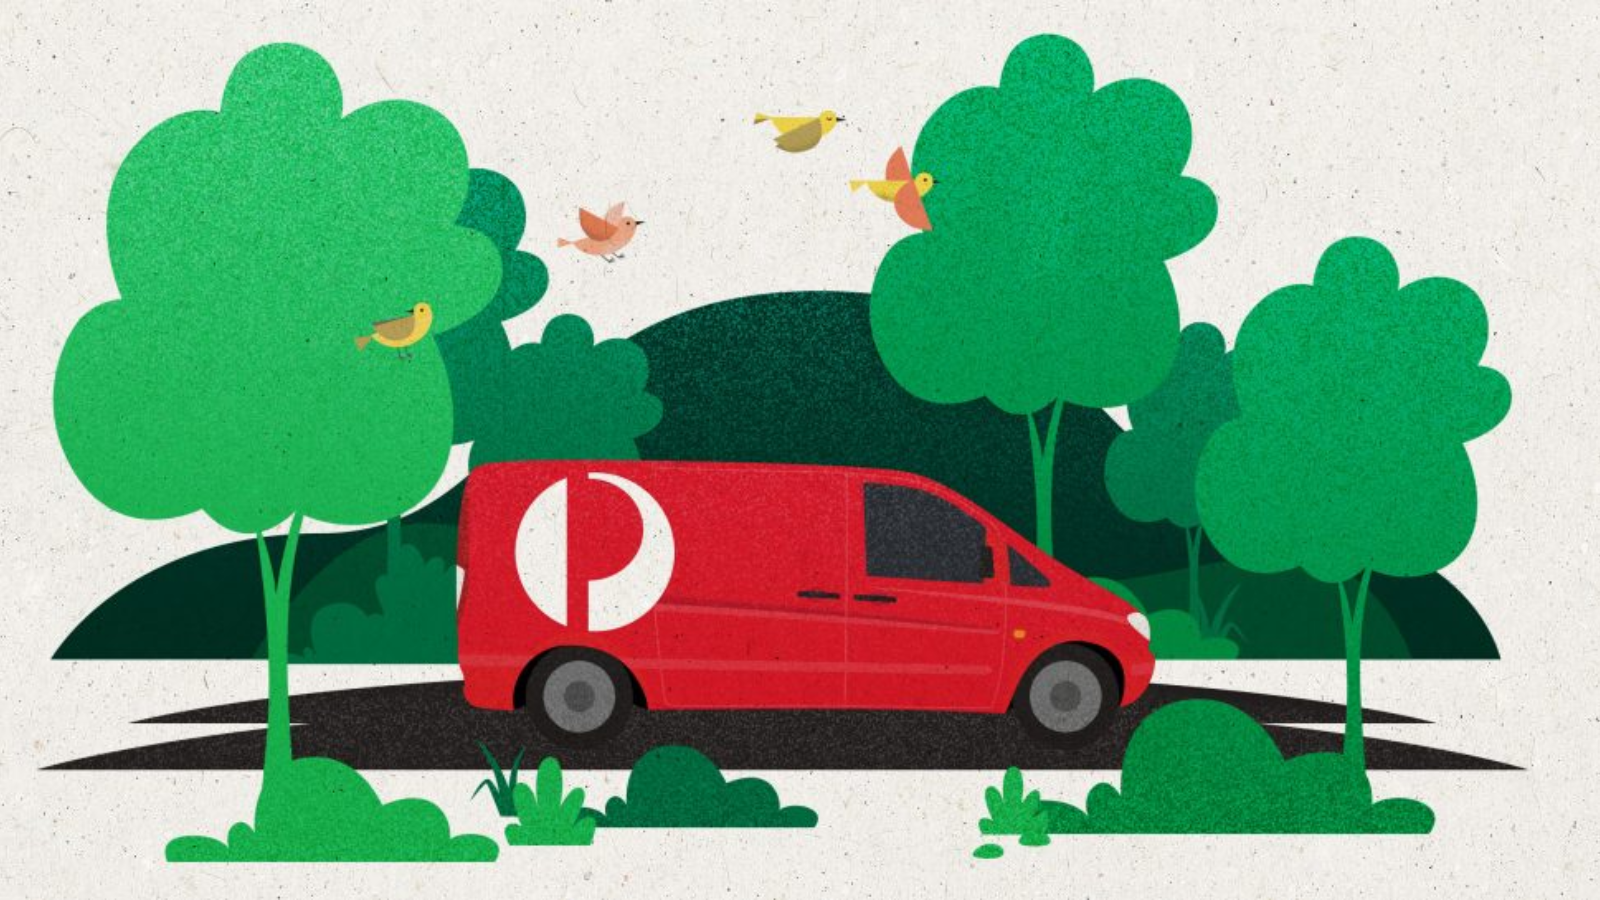 Orders are sent 100% Carbon Neutral by Australia Post